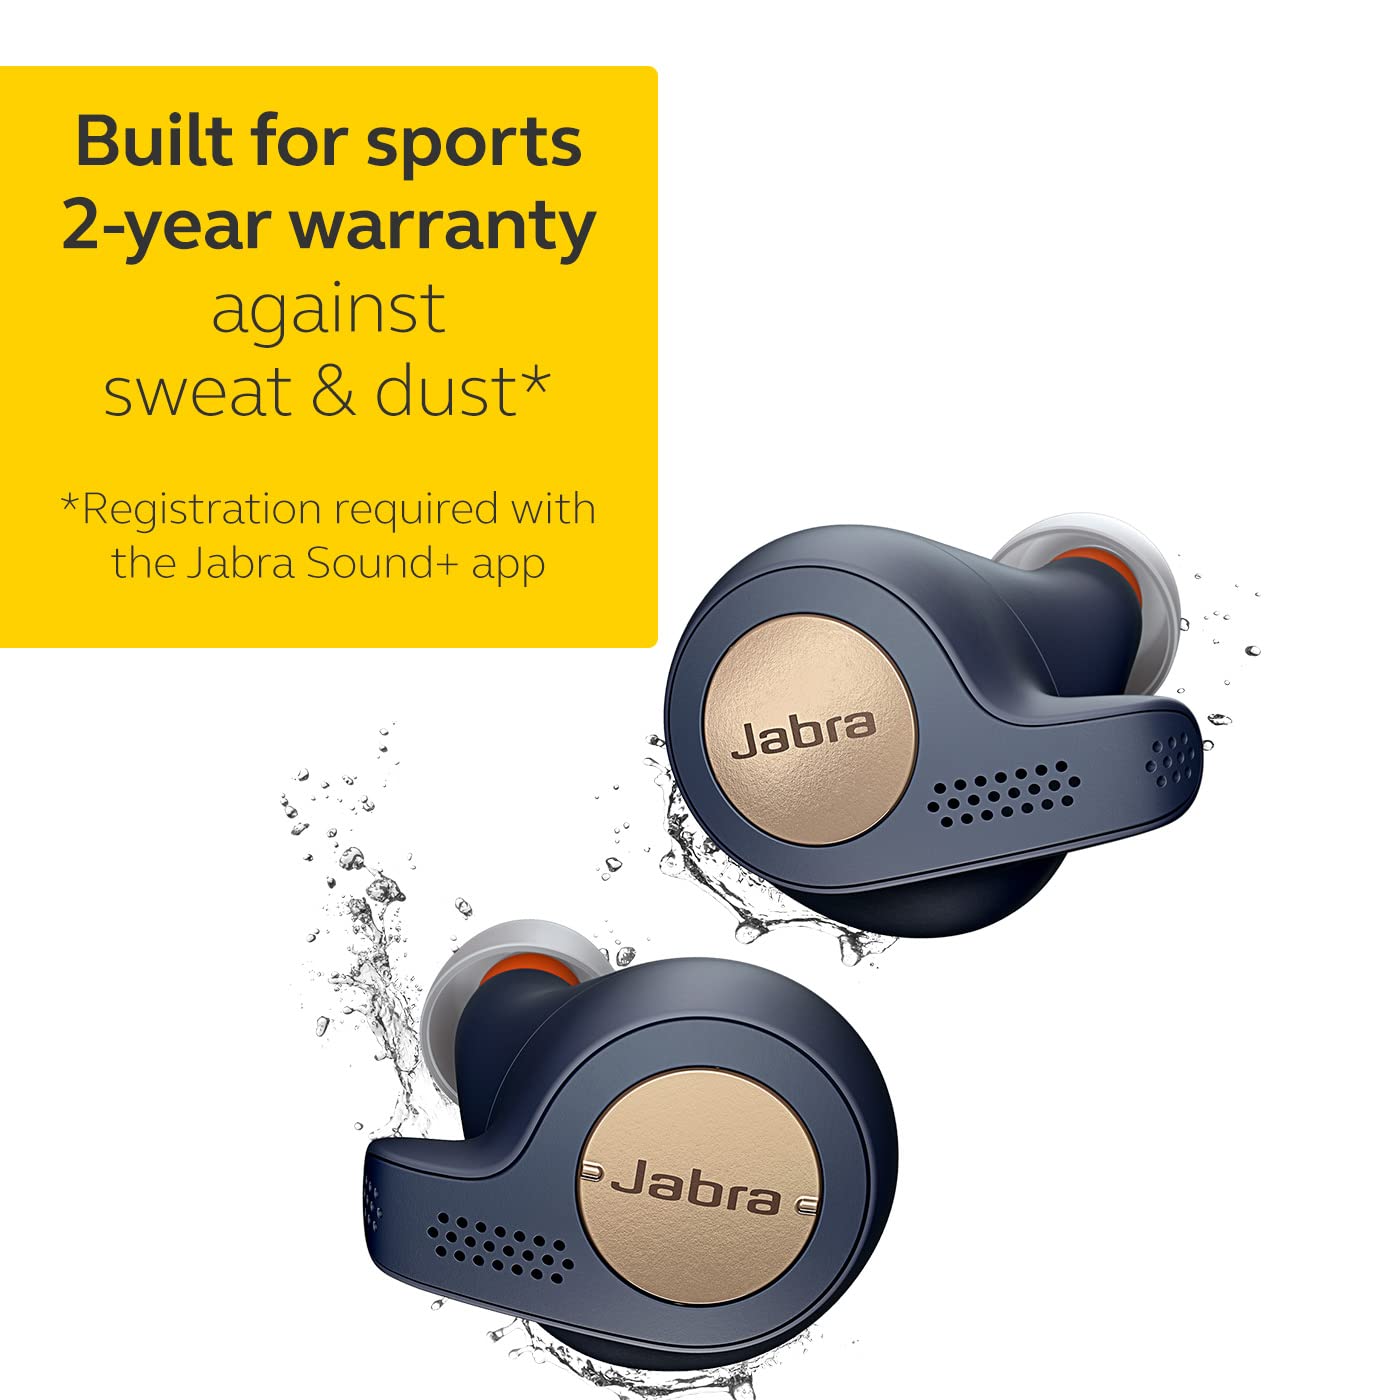 Jabra Elite Active 65t – True Wireless Earbuds with Charging Case, Copper Blue – Bluetooth Earbuds with a Secure Fit and Superior Sound, Long Battery Life and More (100-99010000-02)